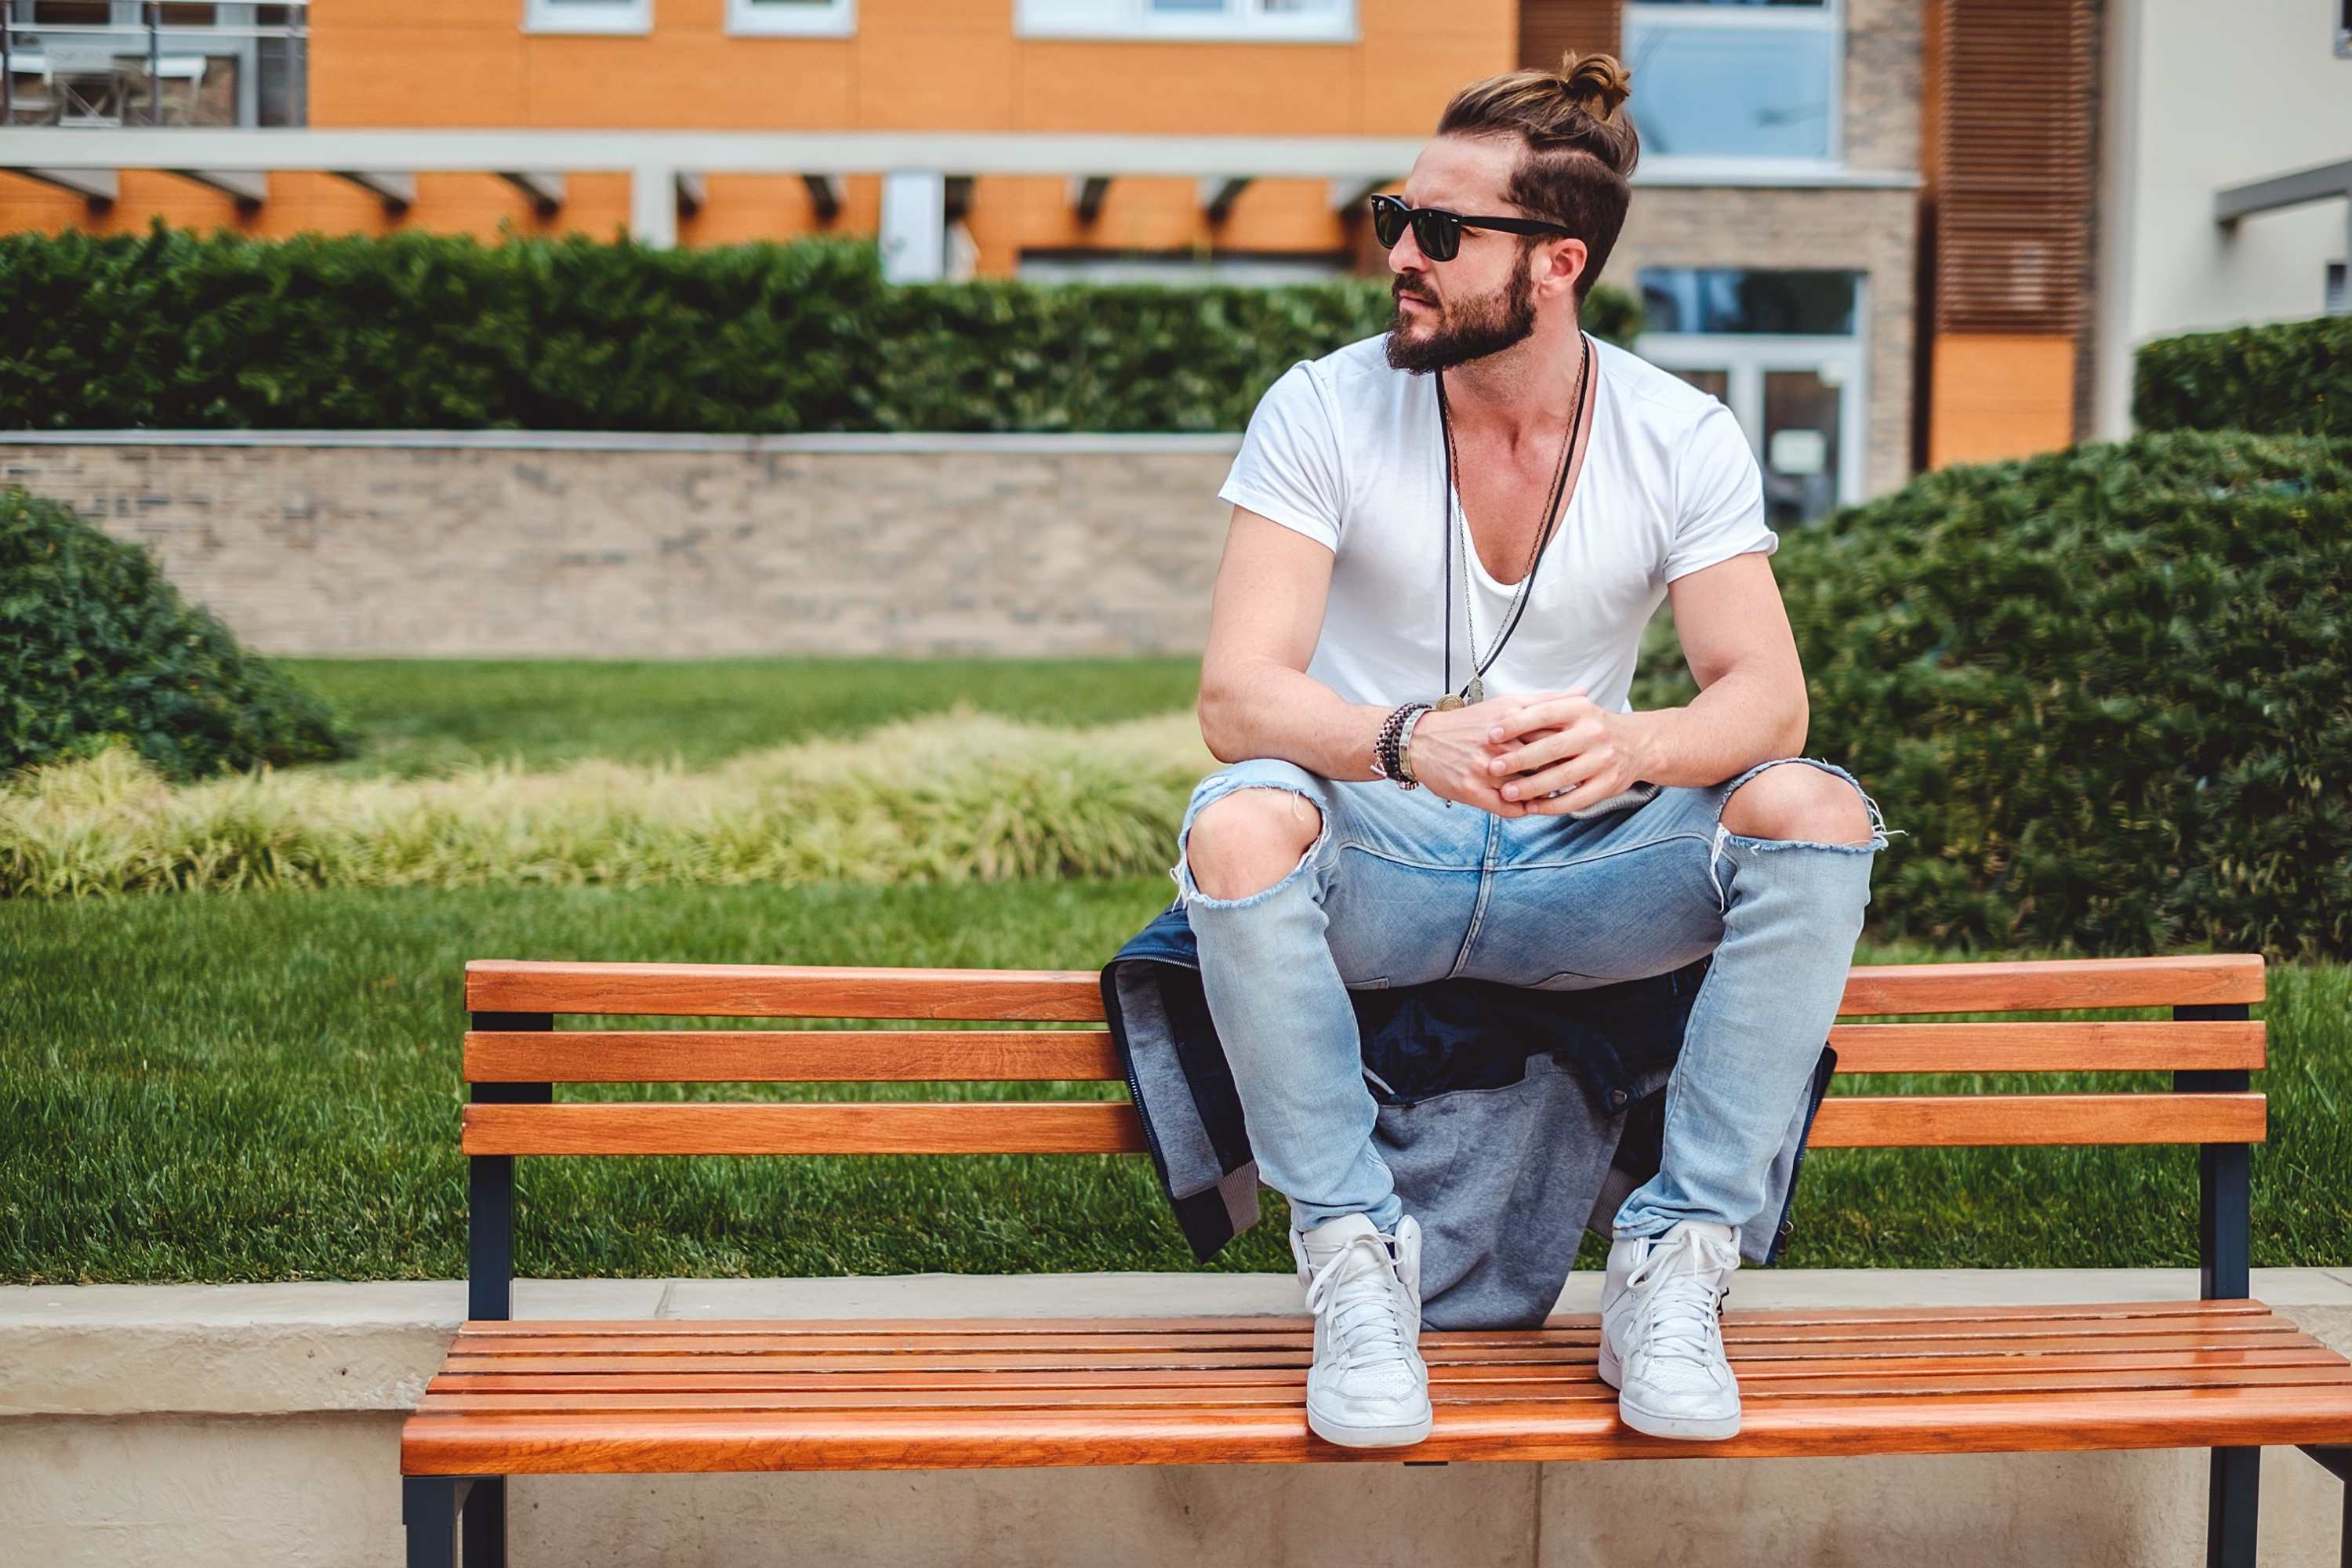 Man sitting on bench with ripped jeans